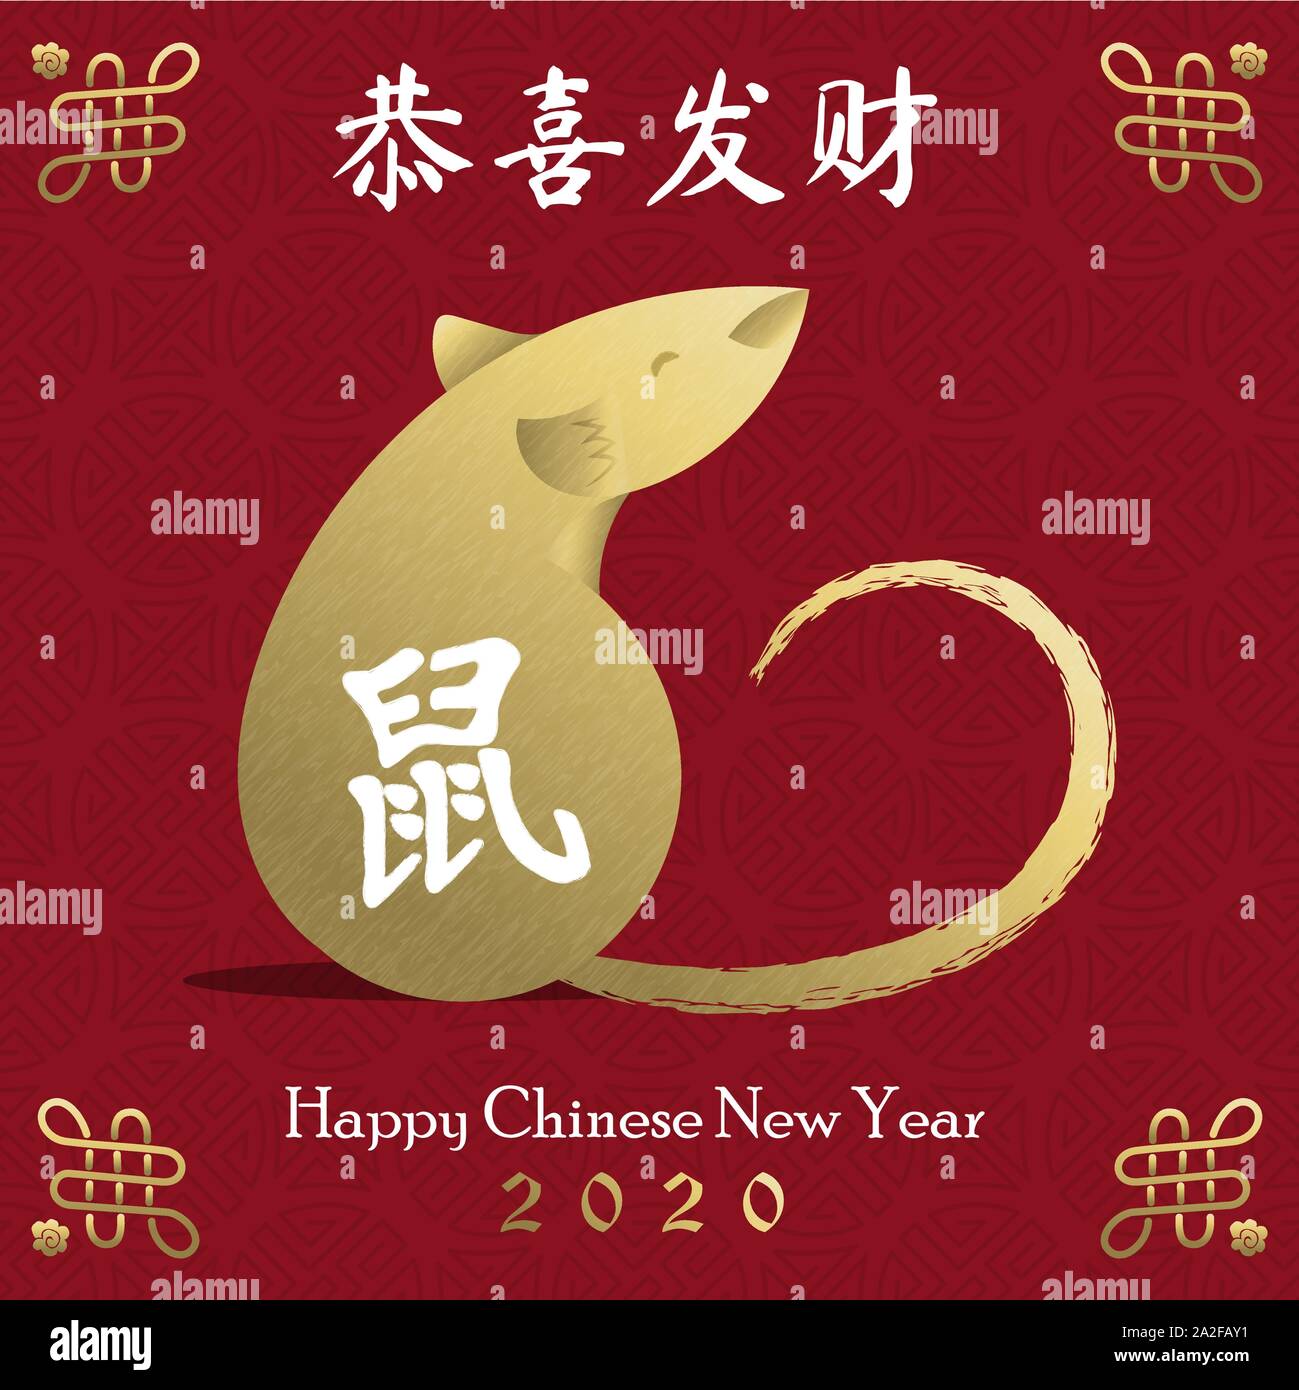 Chinese new year 2020 greeting card of gold mouse animal on red asian art background ...